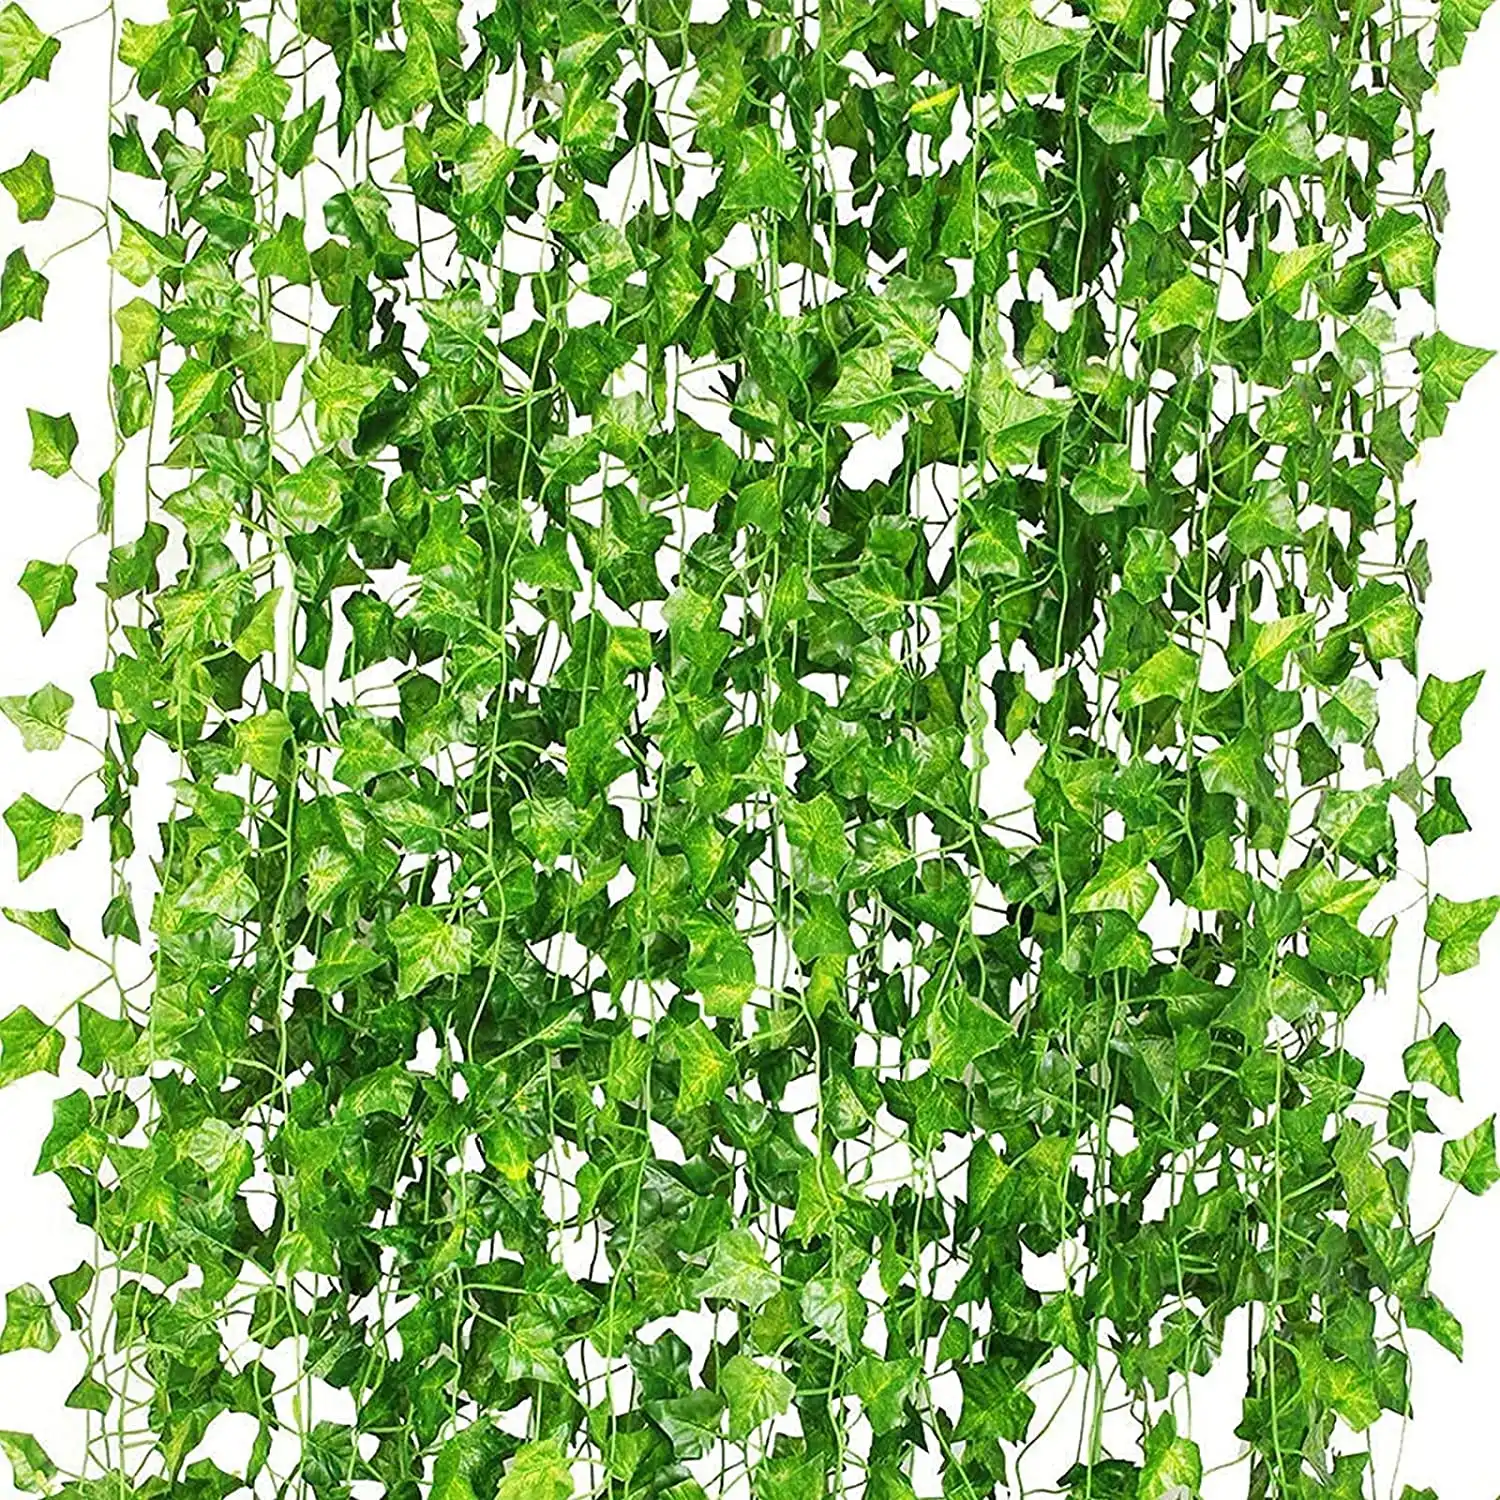 Huiran Artificial Ivy Vines Leaves Wholesale Cheap Greenery Vine Garland Artificial Ivy Garland for Wedding Home Decoration